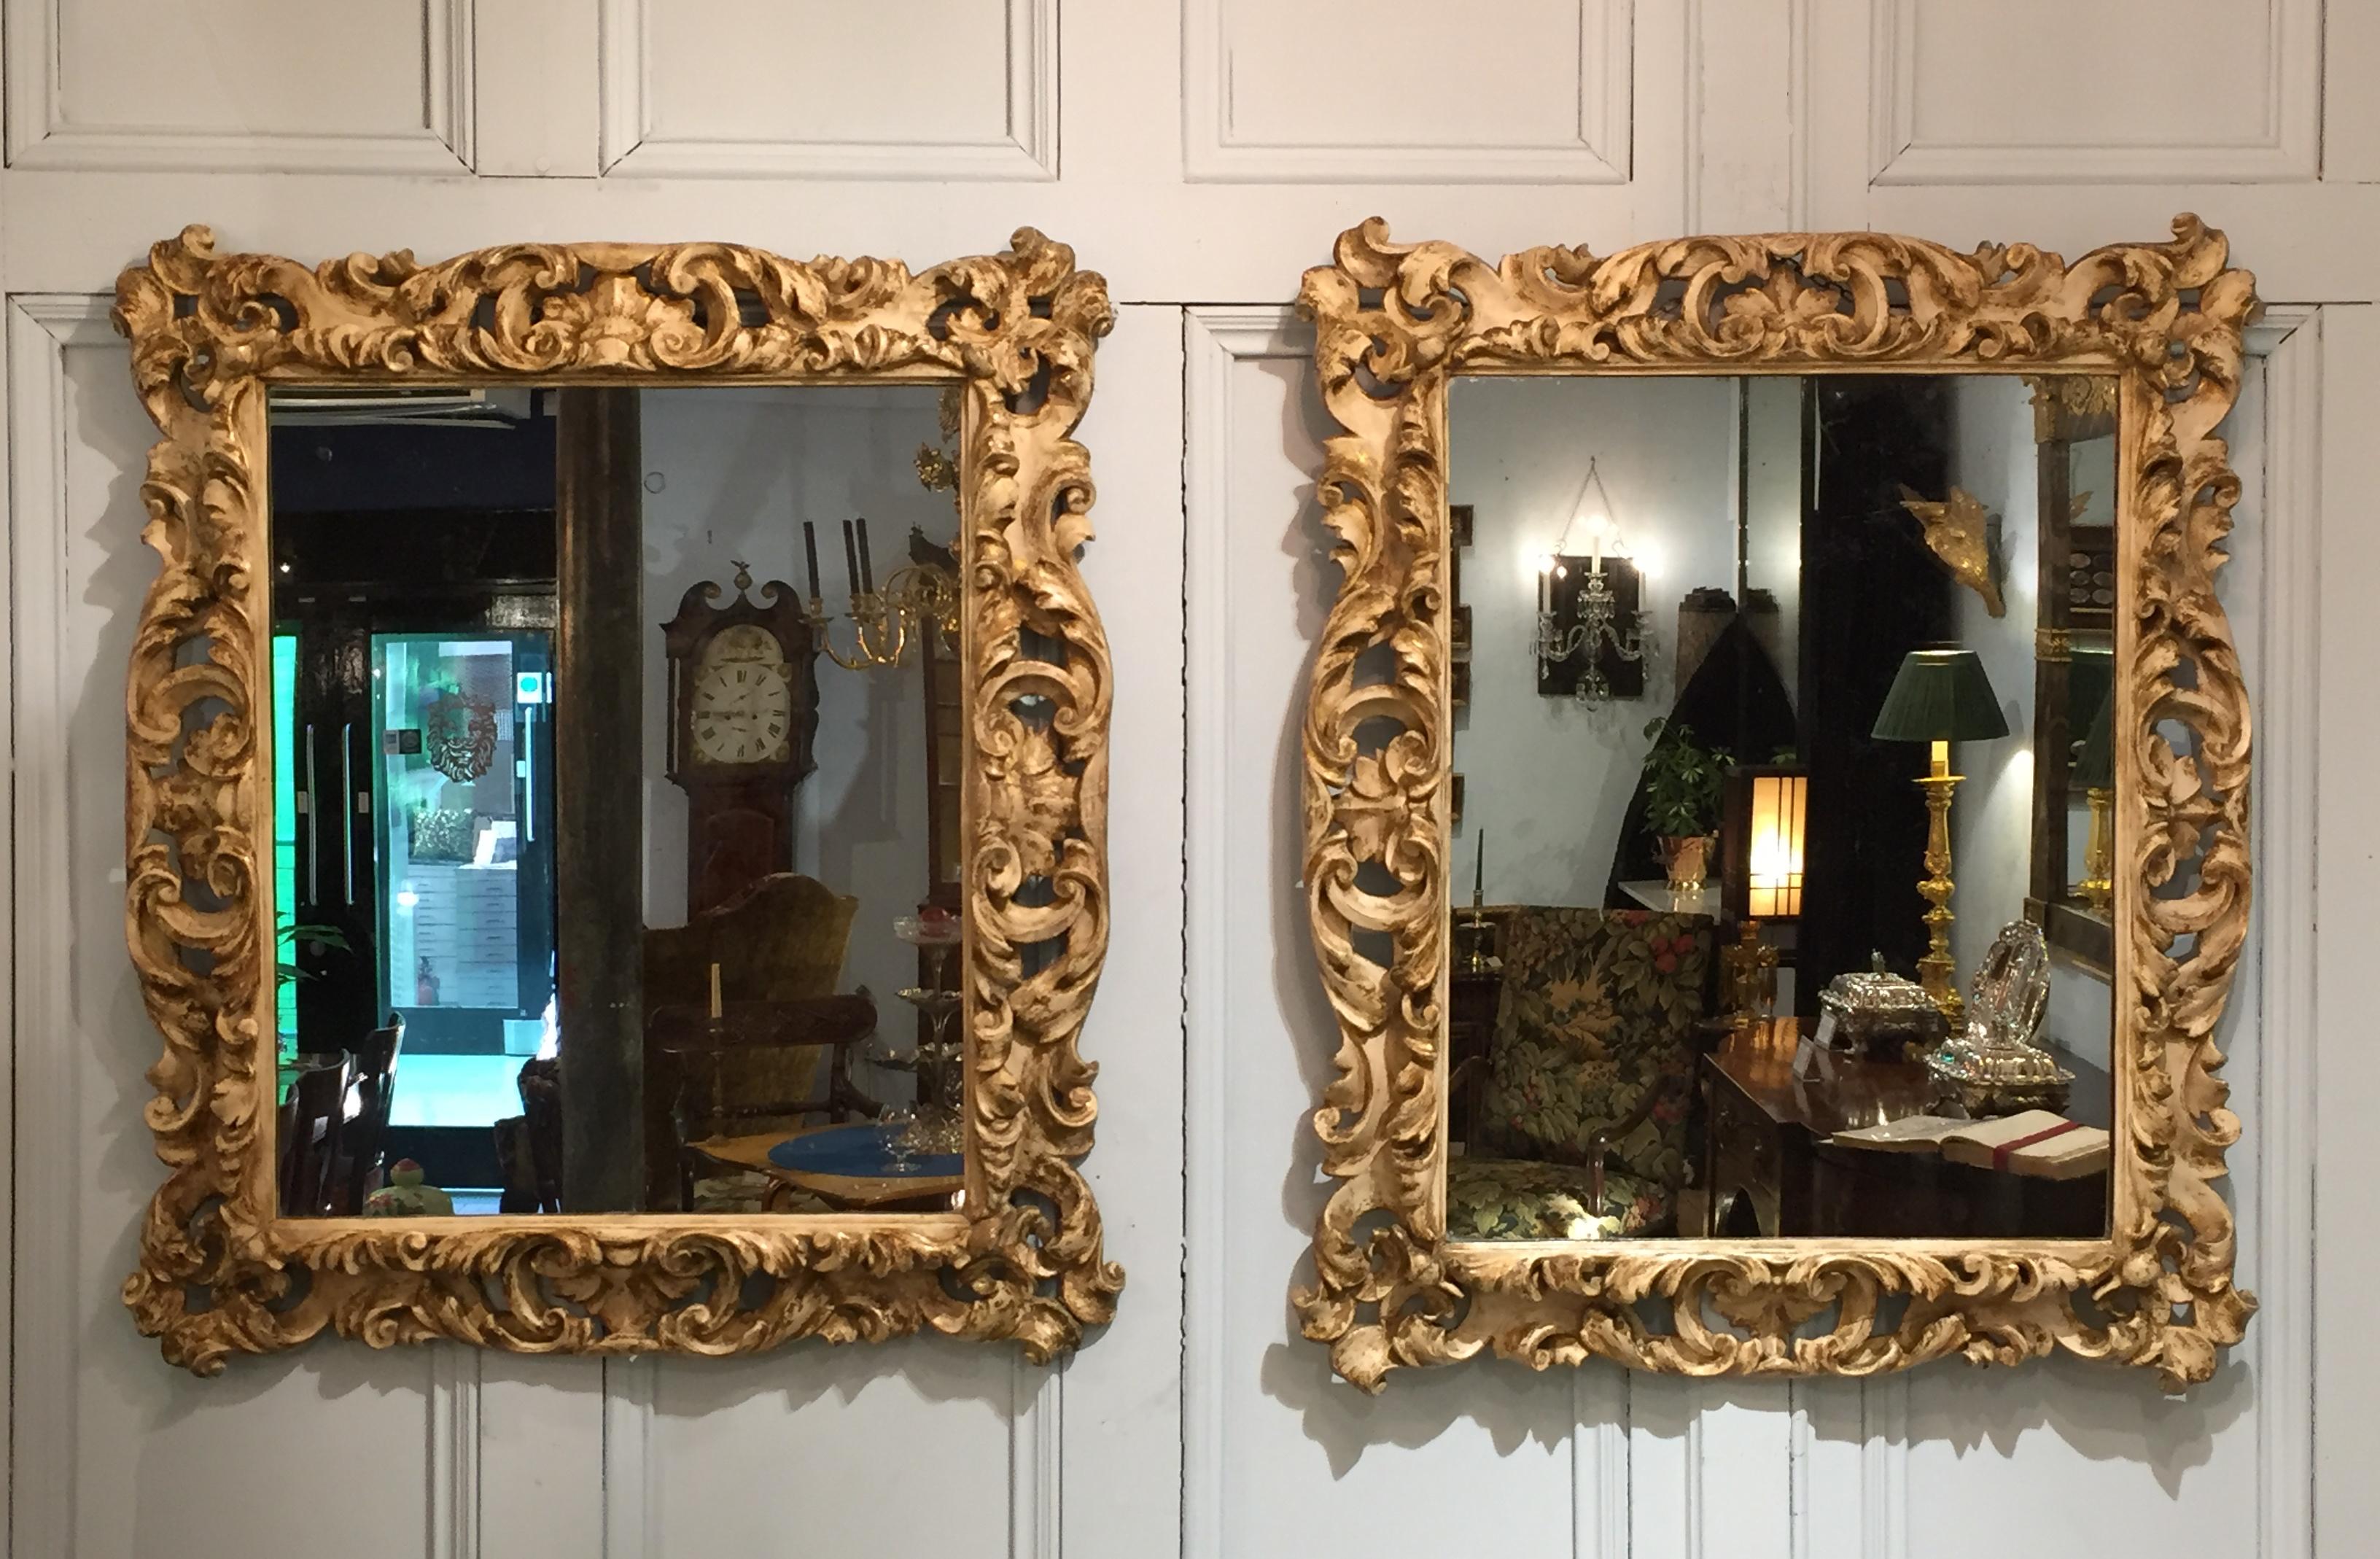 A superb pair of Carolean carved wood, gesso and parcel gilt frames. Originally to hold a portrait of a lady and a gentleman, later fitted with two 18th century mirror plates. The scrolling and stylized form is typical of the late 17th century